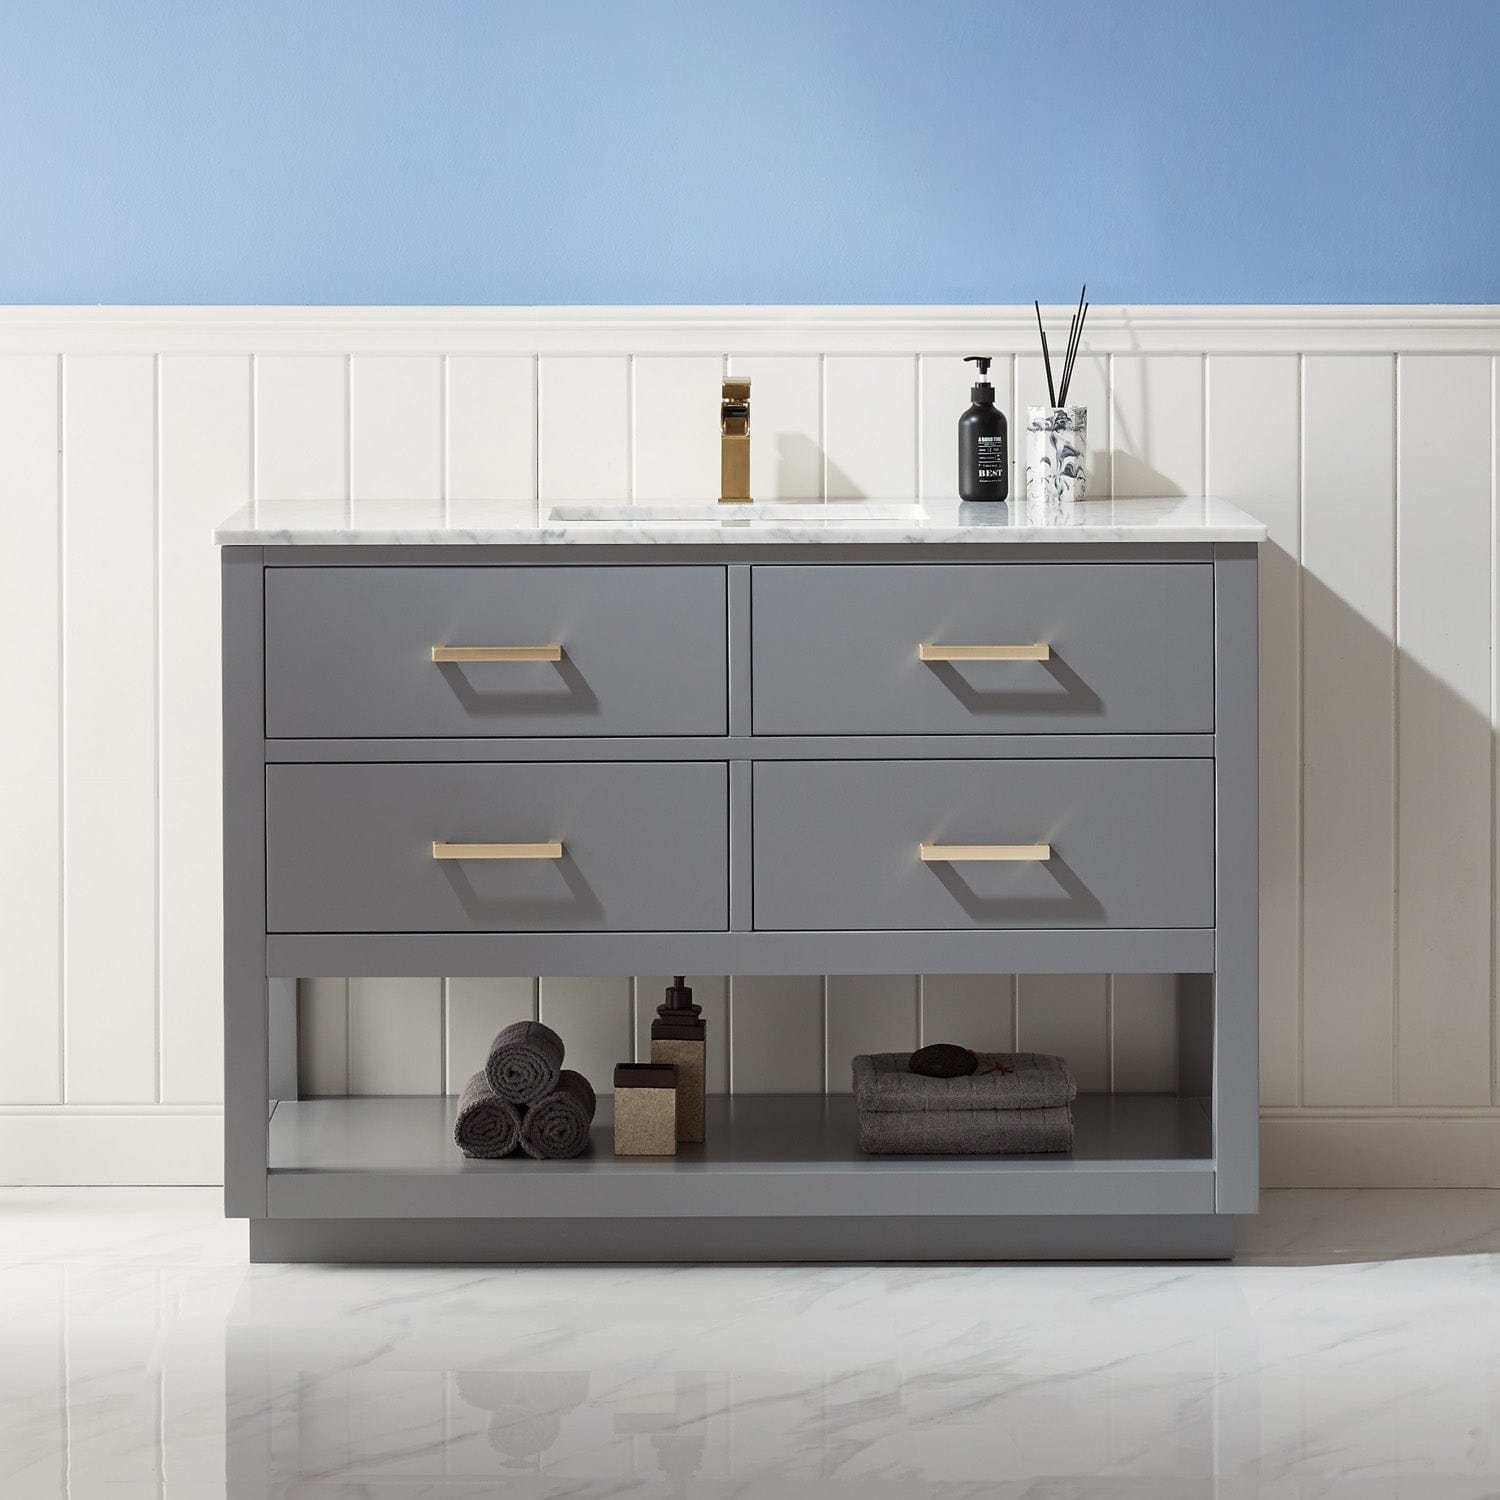 Altair Remi 48" Single Bathroom Vanity Set in Gray and Carrara White Marble Countertop without Mirror 532048-GR-CA-NM - Molaix631112971461Vanity532048-GR-CA-NM